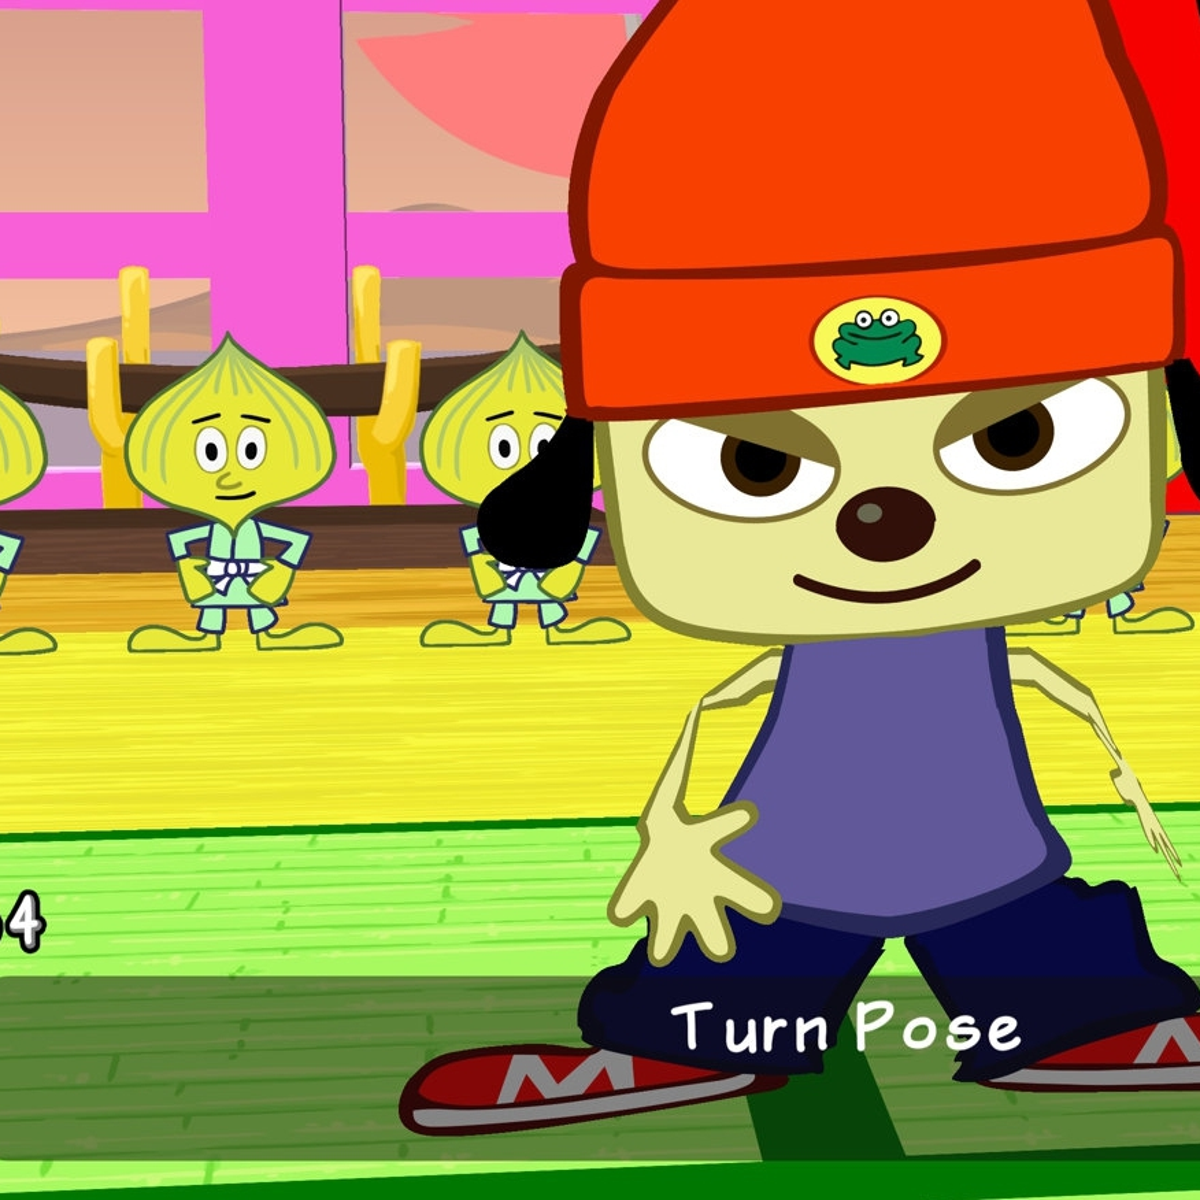 It looks like PS4 Parappa Remastered is the PSP game running under